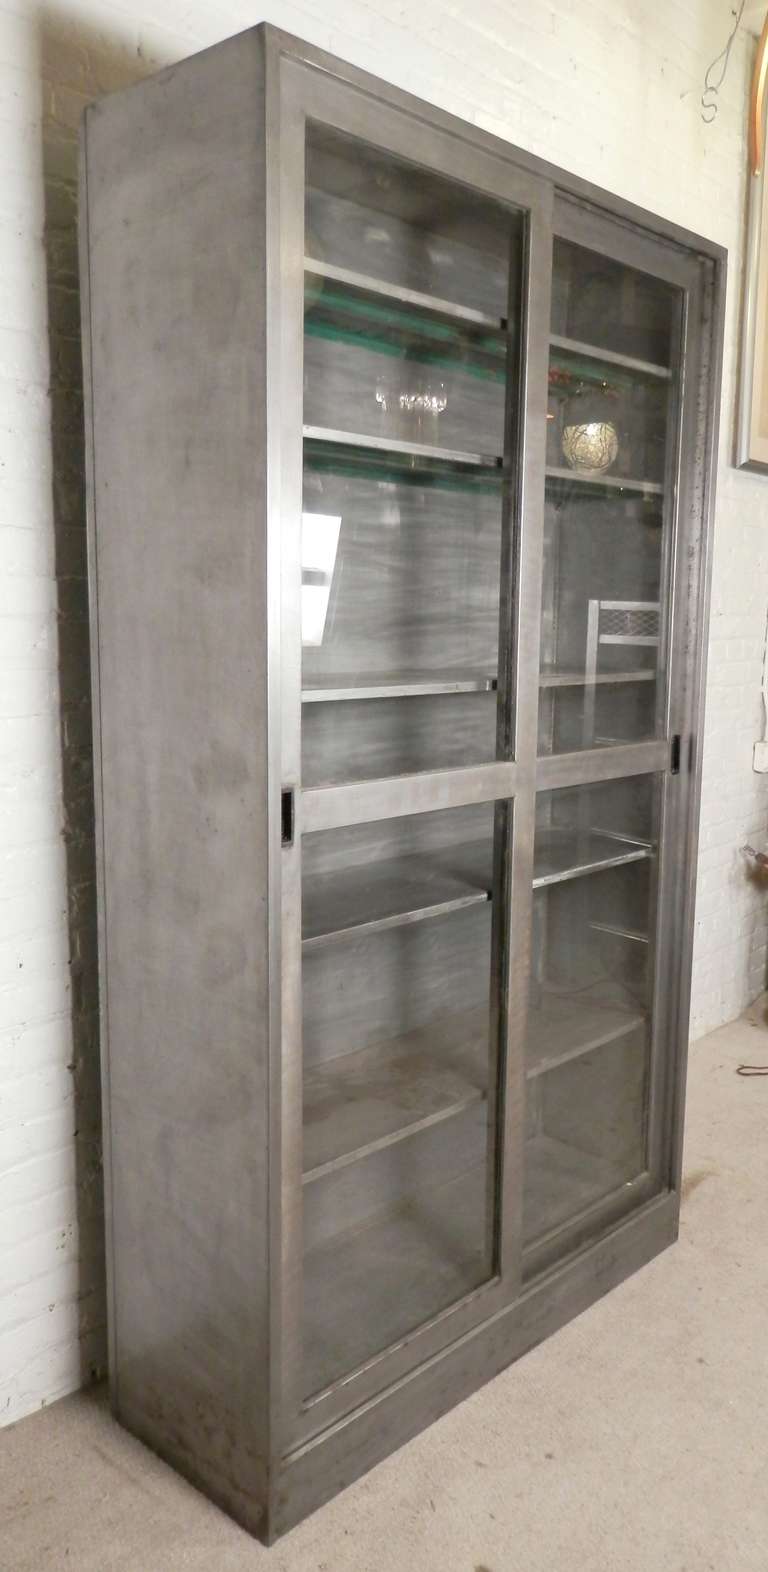 Over-sized factory cabinet with large sliding glass doors. Comes with five metal shelves, fully adjustable up and down the cabinet.

(Please confirm item location - NY or NJ - with dealer)